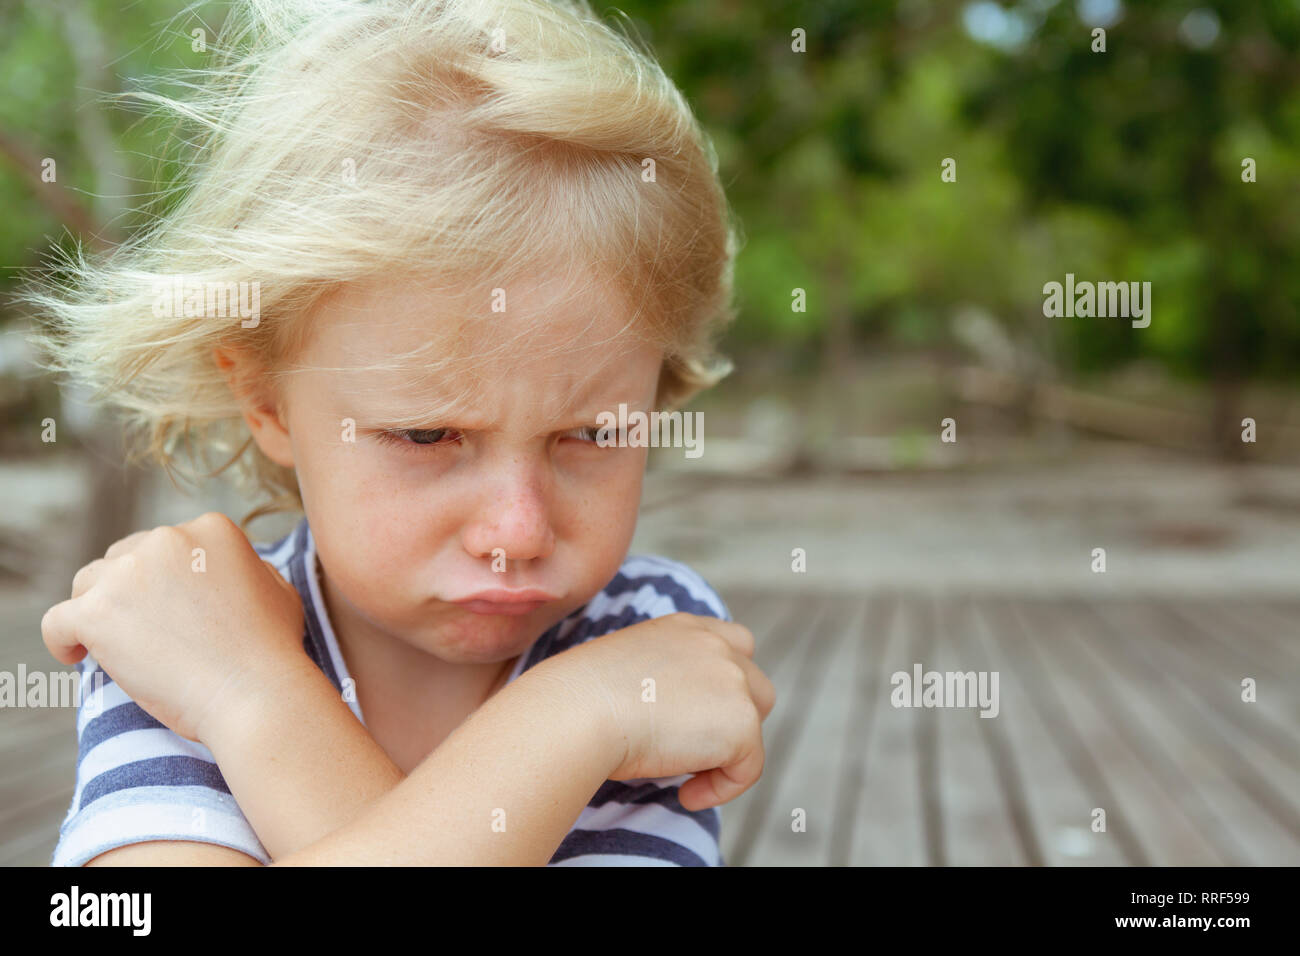 Face portrait of annoyed and unhappy caucasian kid with crossed arms. Upset and angry child concept for family relations, social problems issues Stock Photo